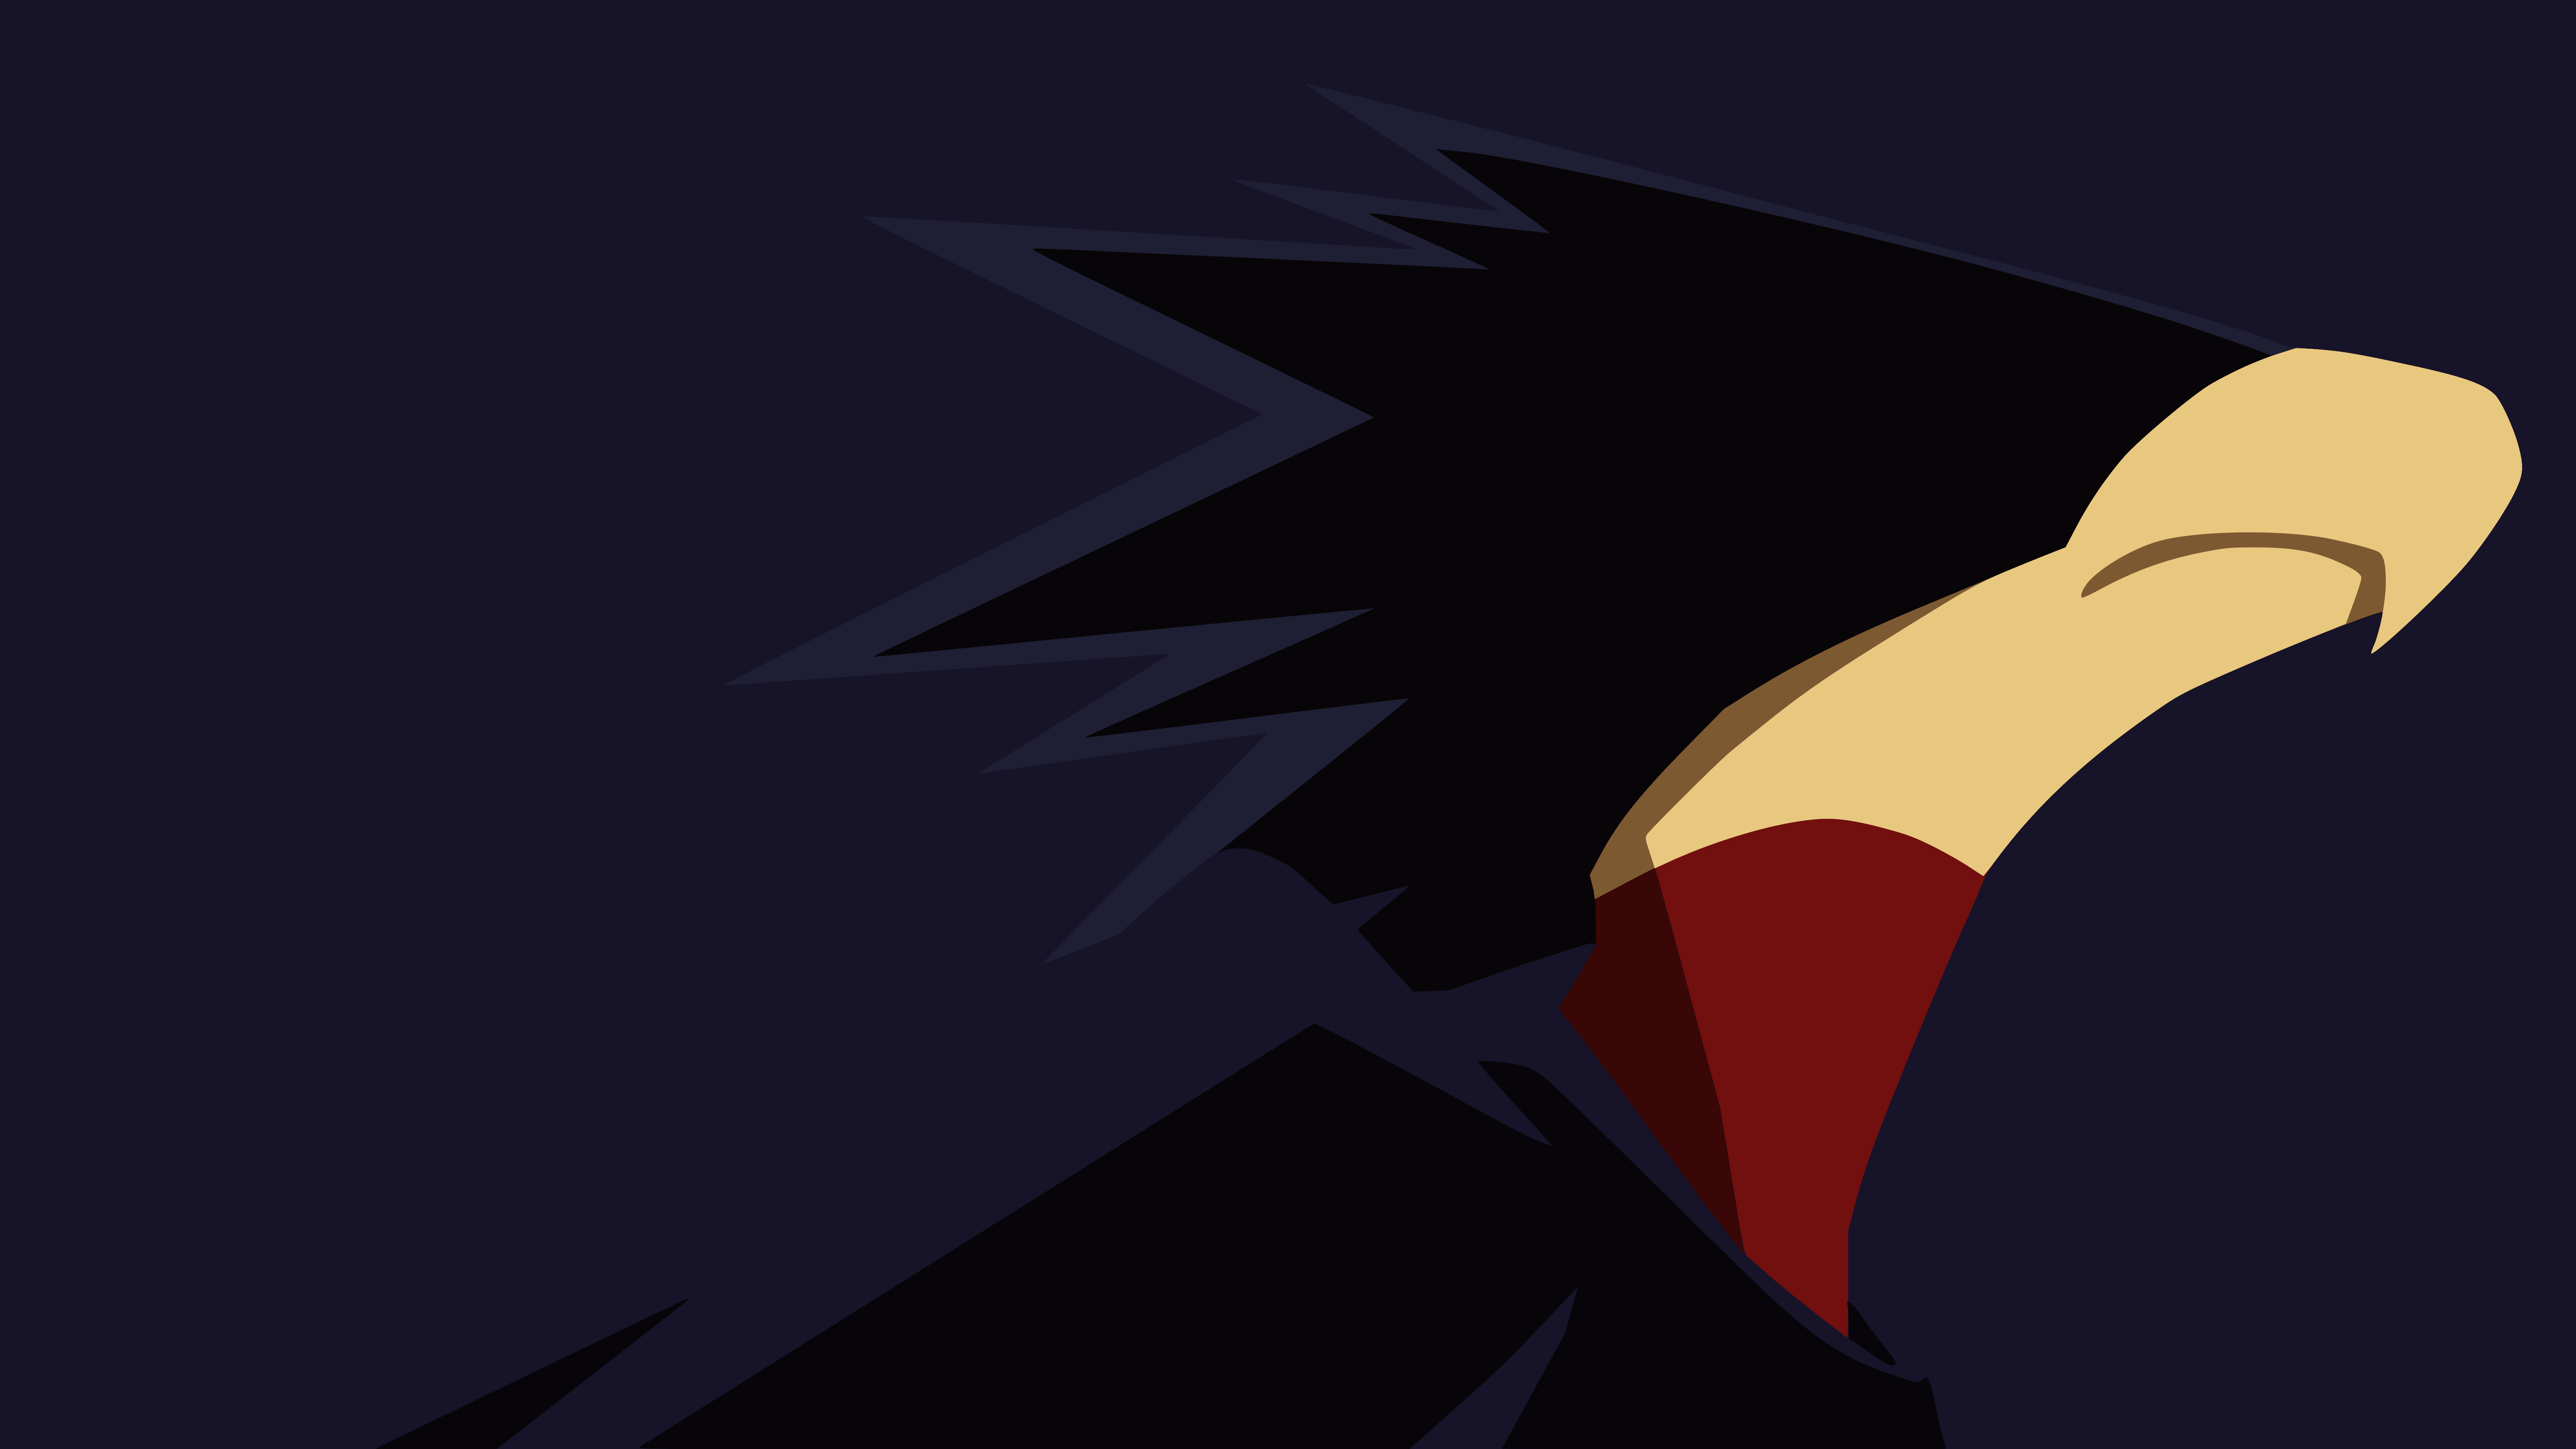 I've Finally Finished My Series Of Class 1 A Wallpaper